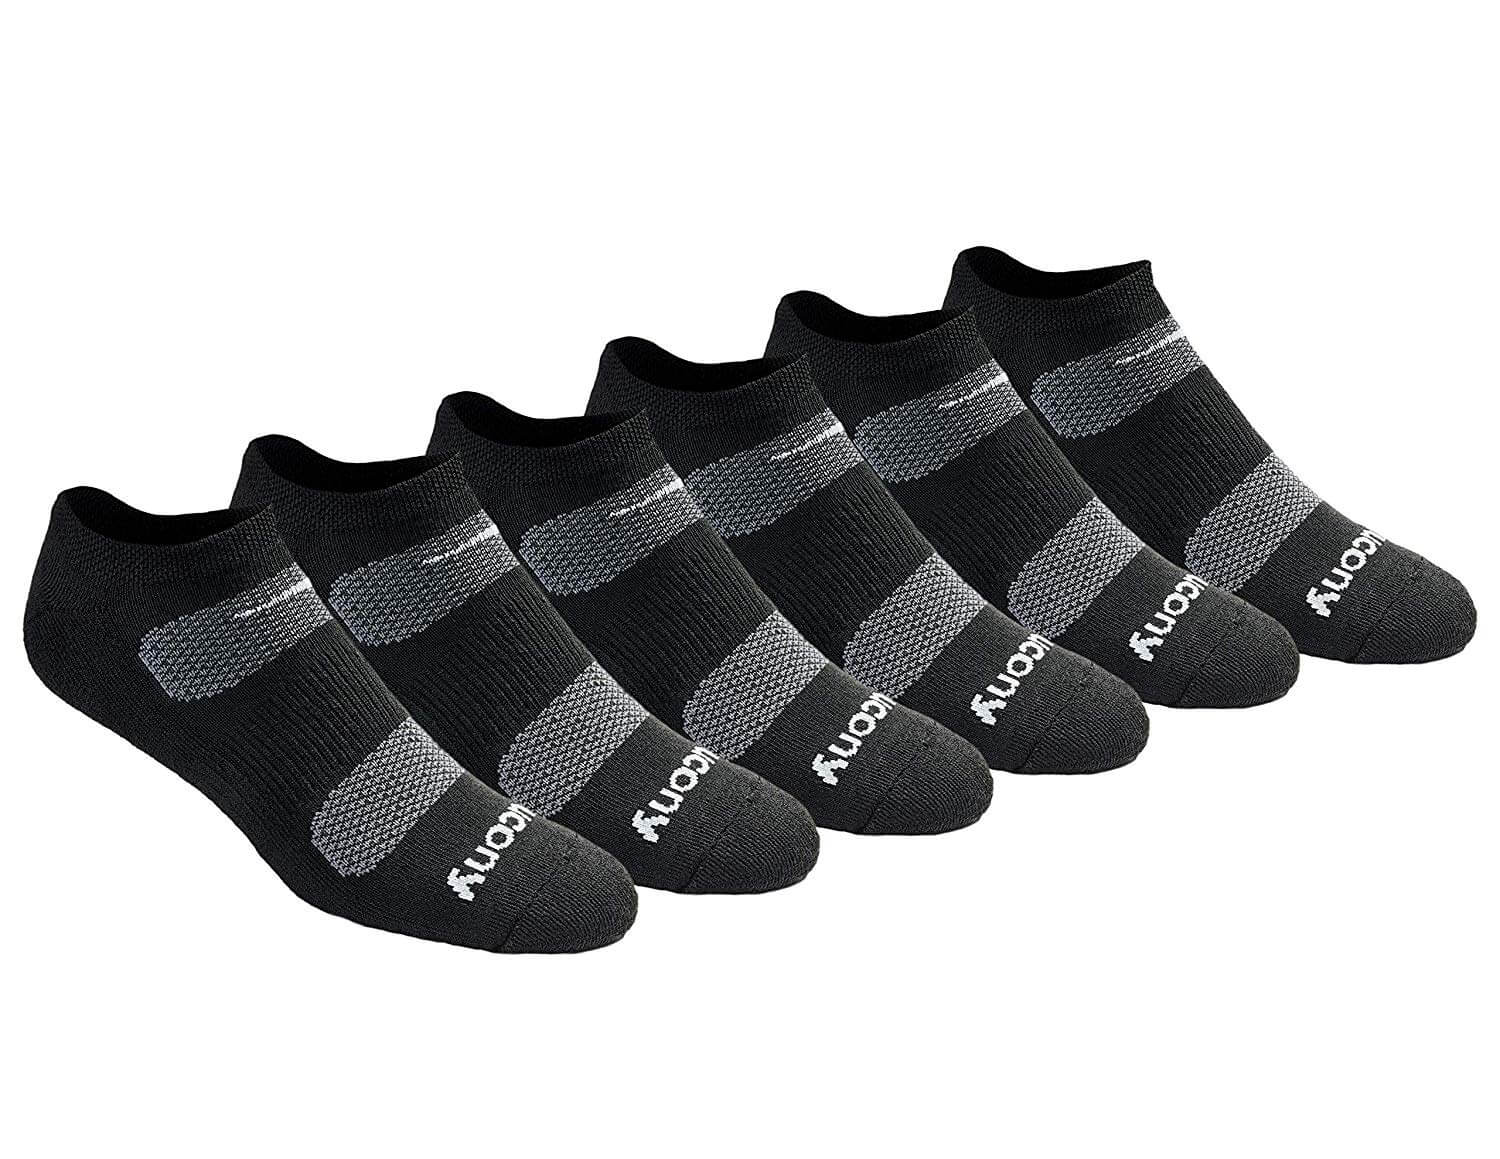 saucony performance socks review